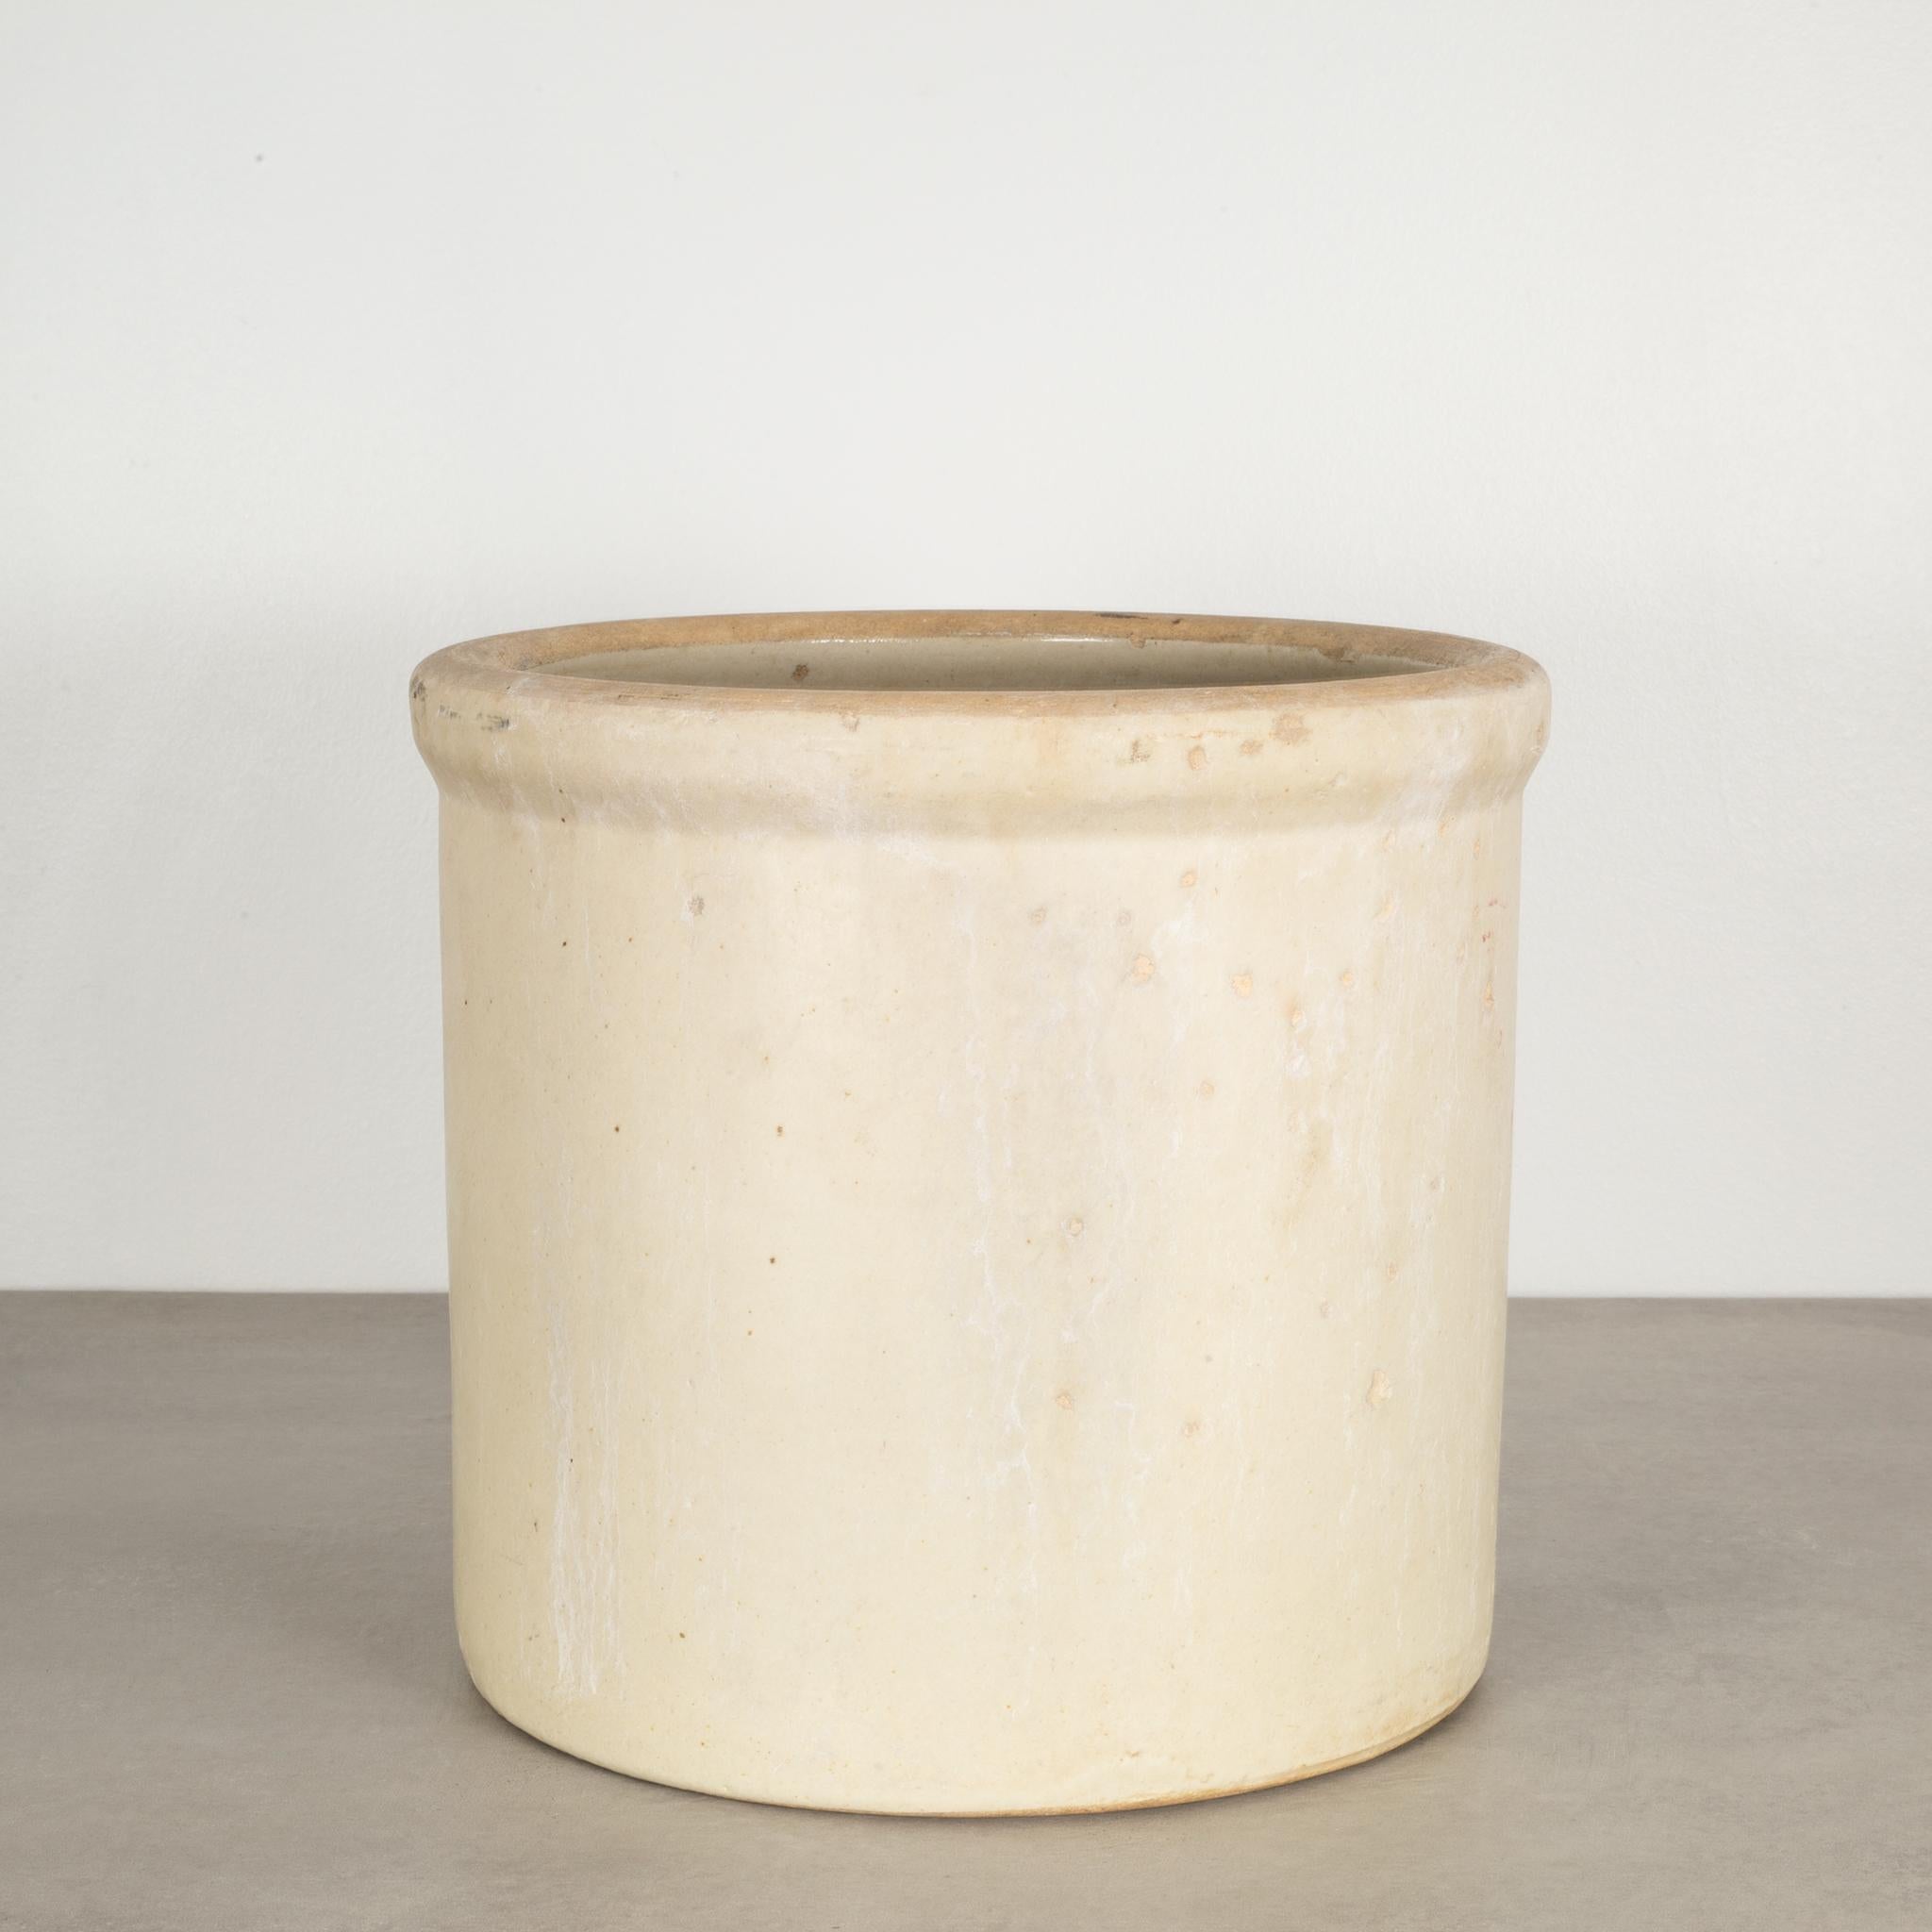 This is an original commercial 2 gallon pickling crock manufactured by the Garden City Pottery Company in San Jose, USA. It is stamped with the company name and is marked #2. The piece has retained its original finish and is in excellent condition